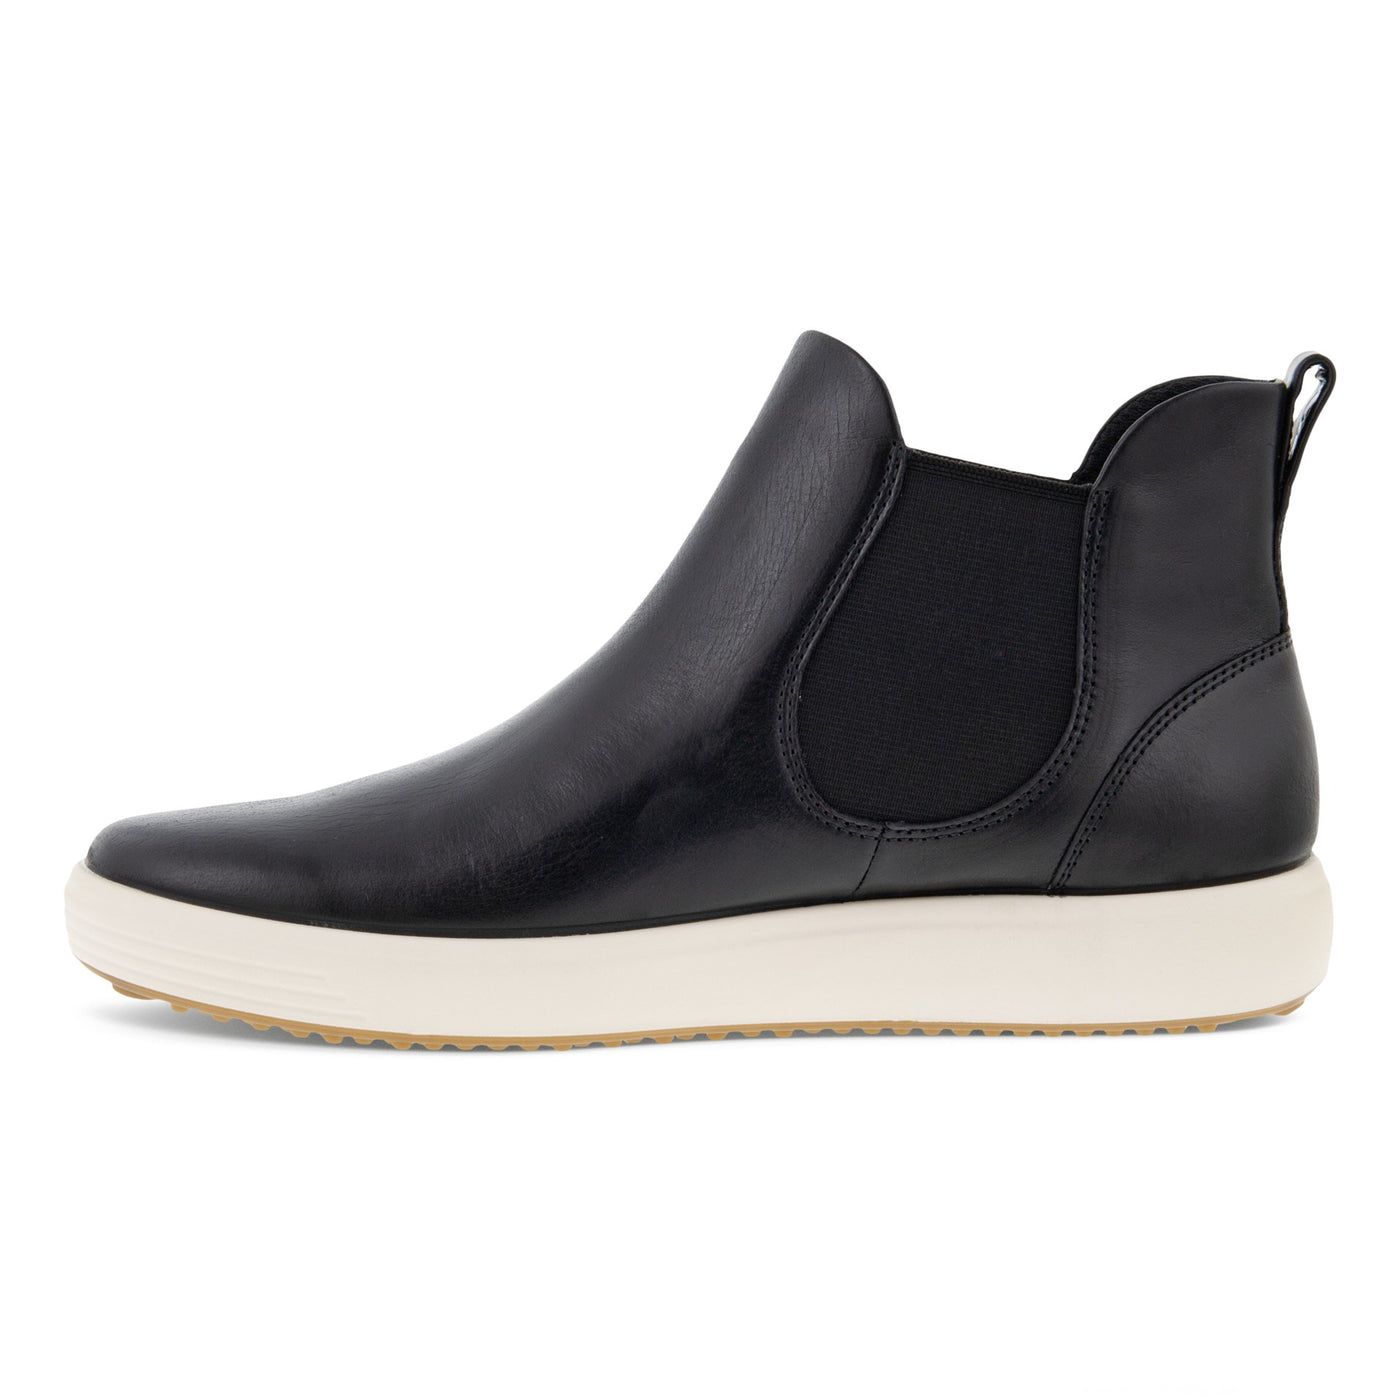 ECCO SOFT 7 BLACK BOOT - Women Boots - Collective Shoes 